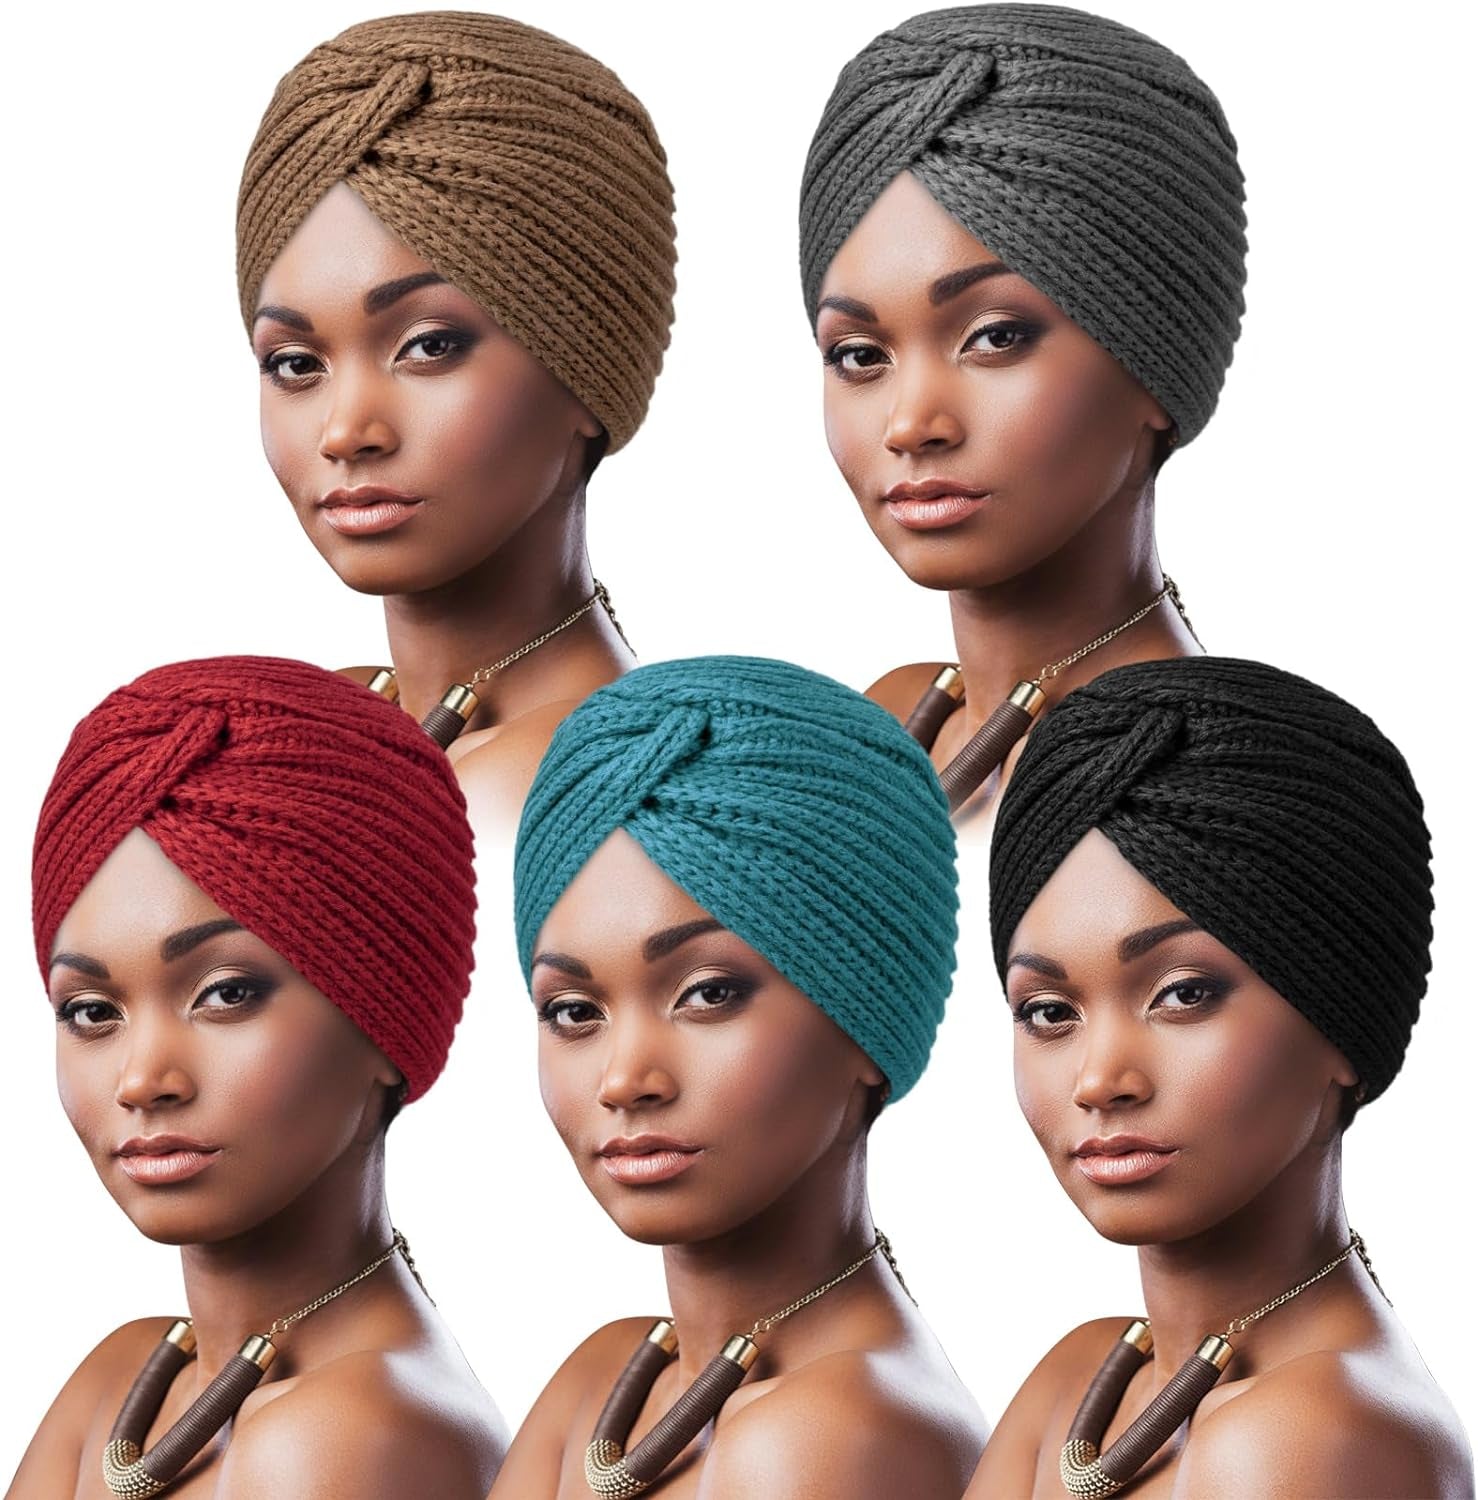 5 Pack Knotted Headwraps for Women African Turban Pre-Knotted Beanie Headwraps Hair Covers